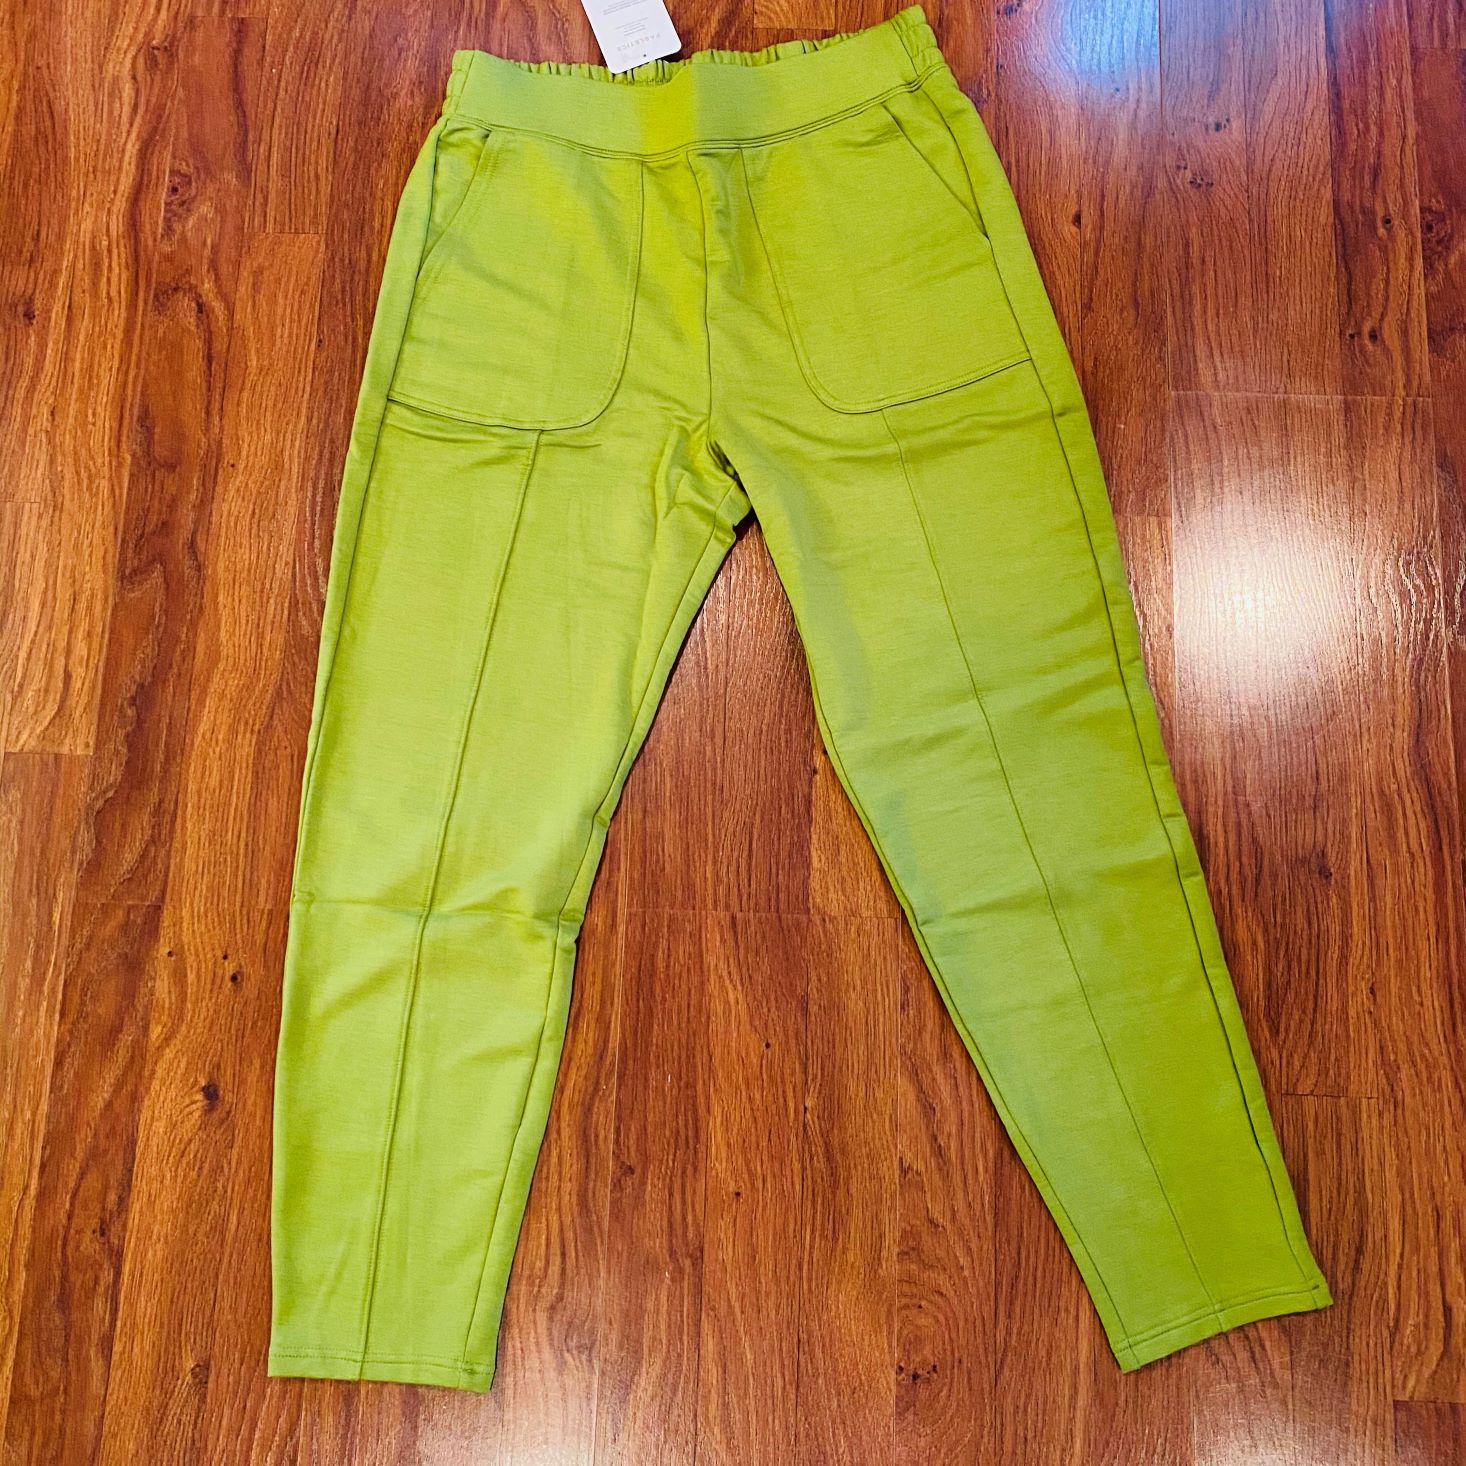 Pants Laid Out Fabletics May 2020 Box